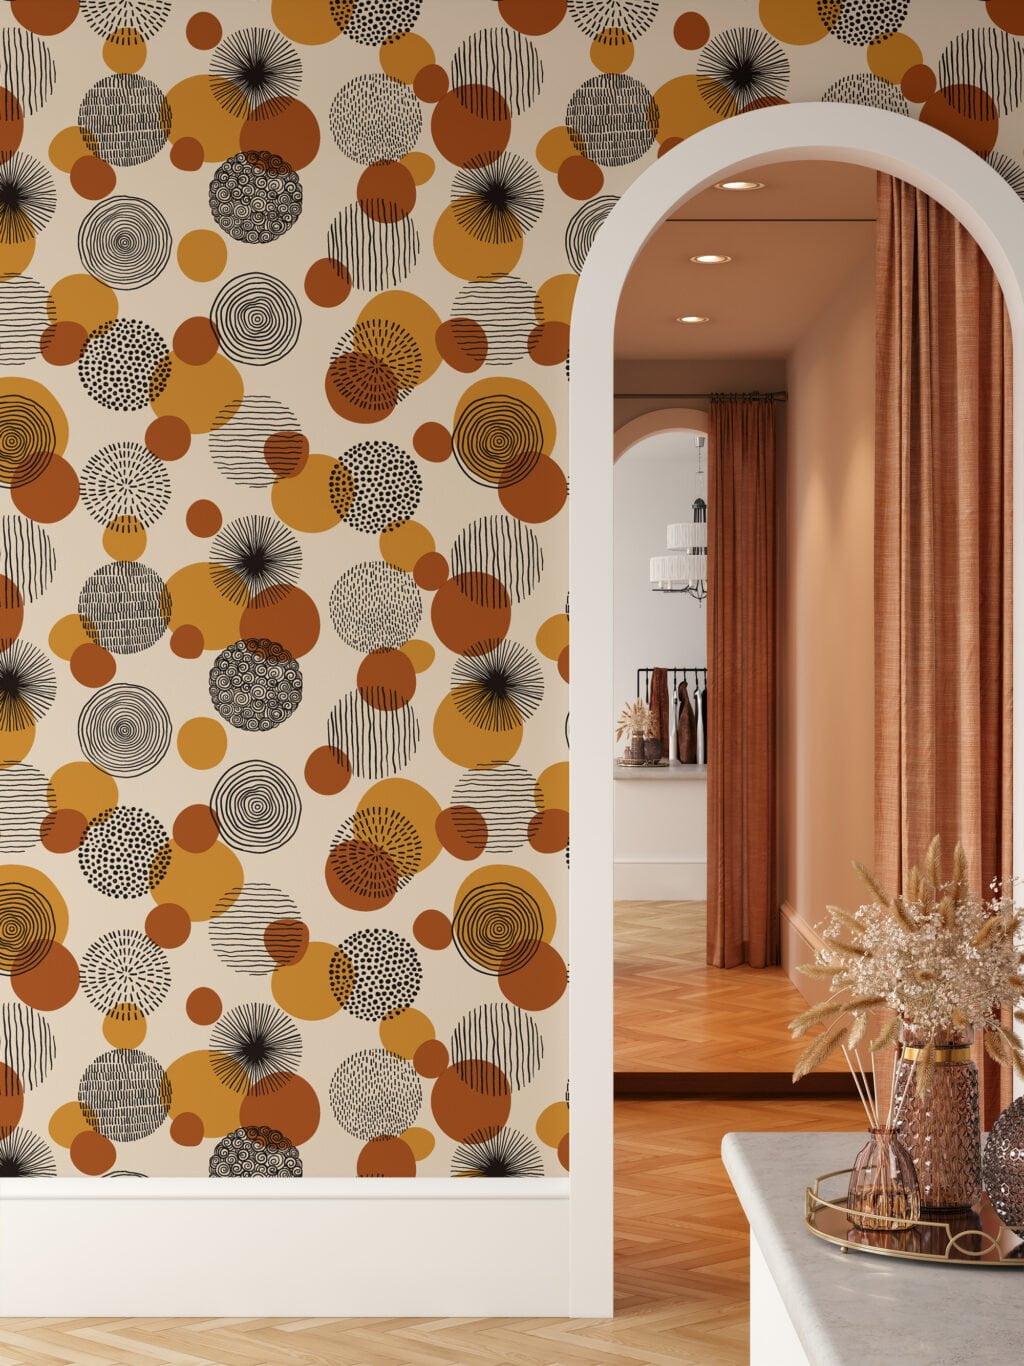 70s Style Circle Patterns Illustration Wallpaper, Retro-Inspired Abstract Dots Peel & Stick Wall Mural